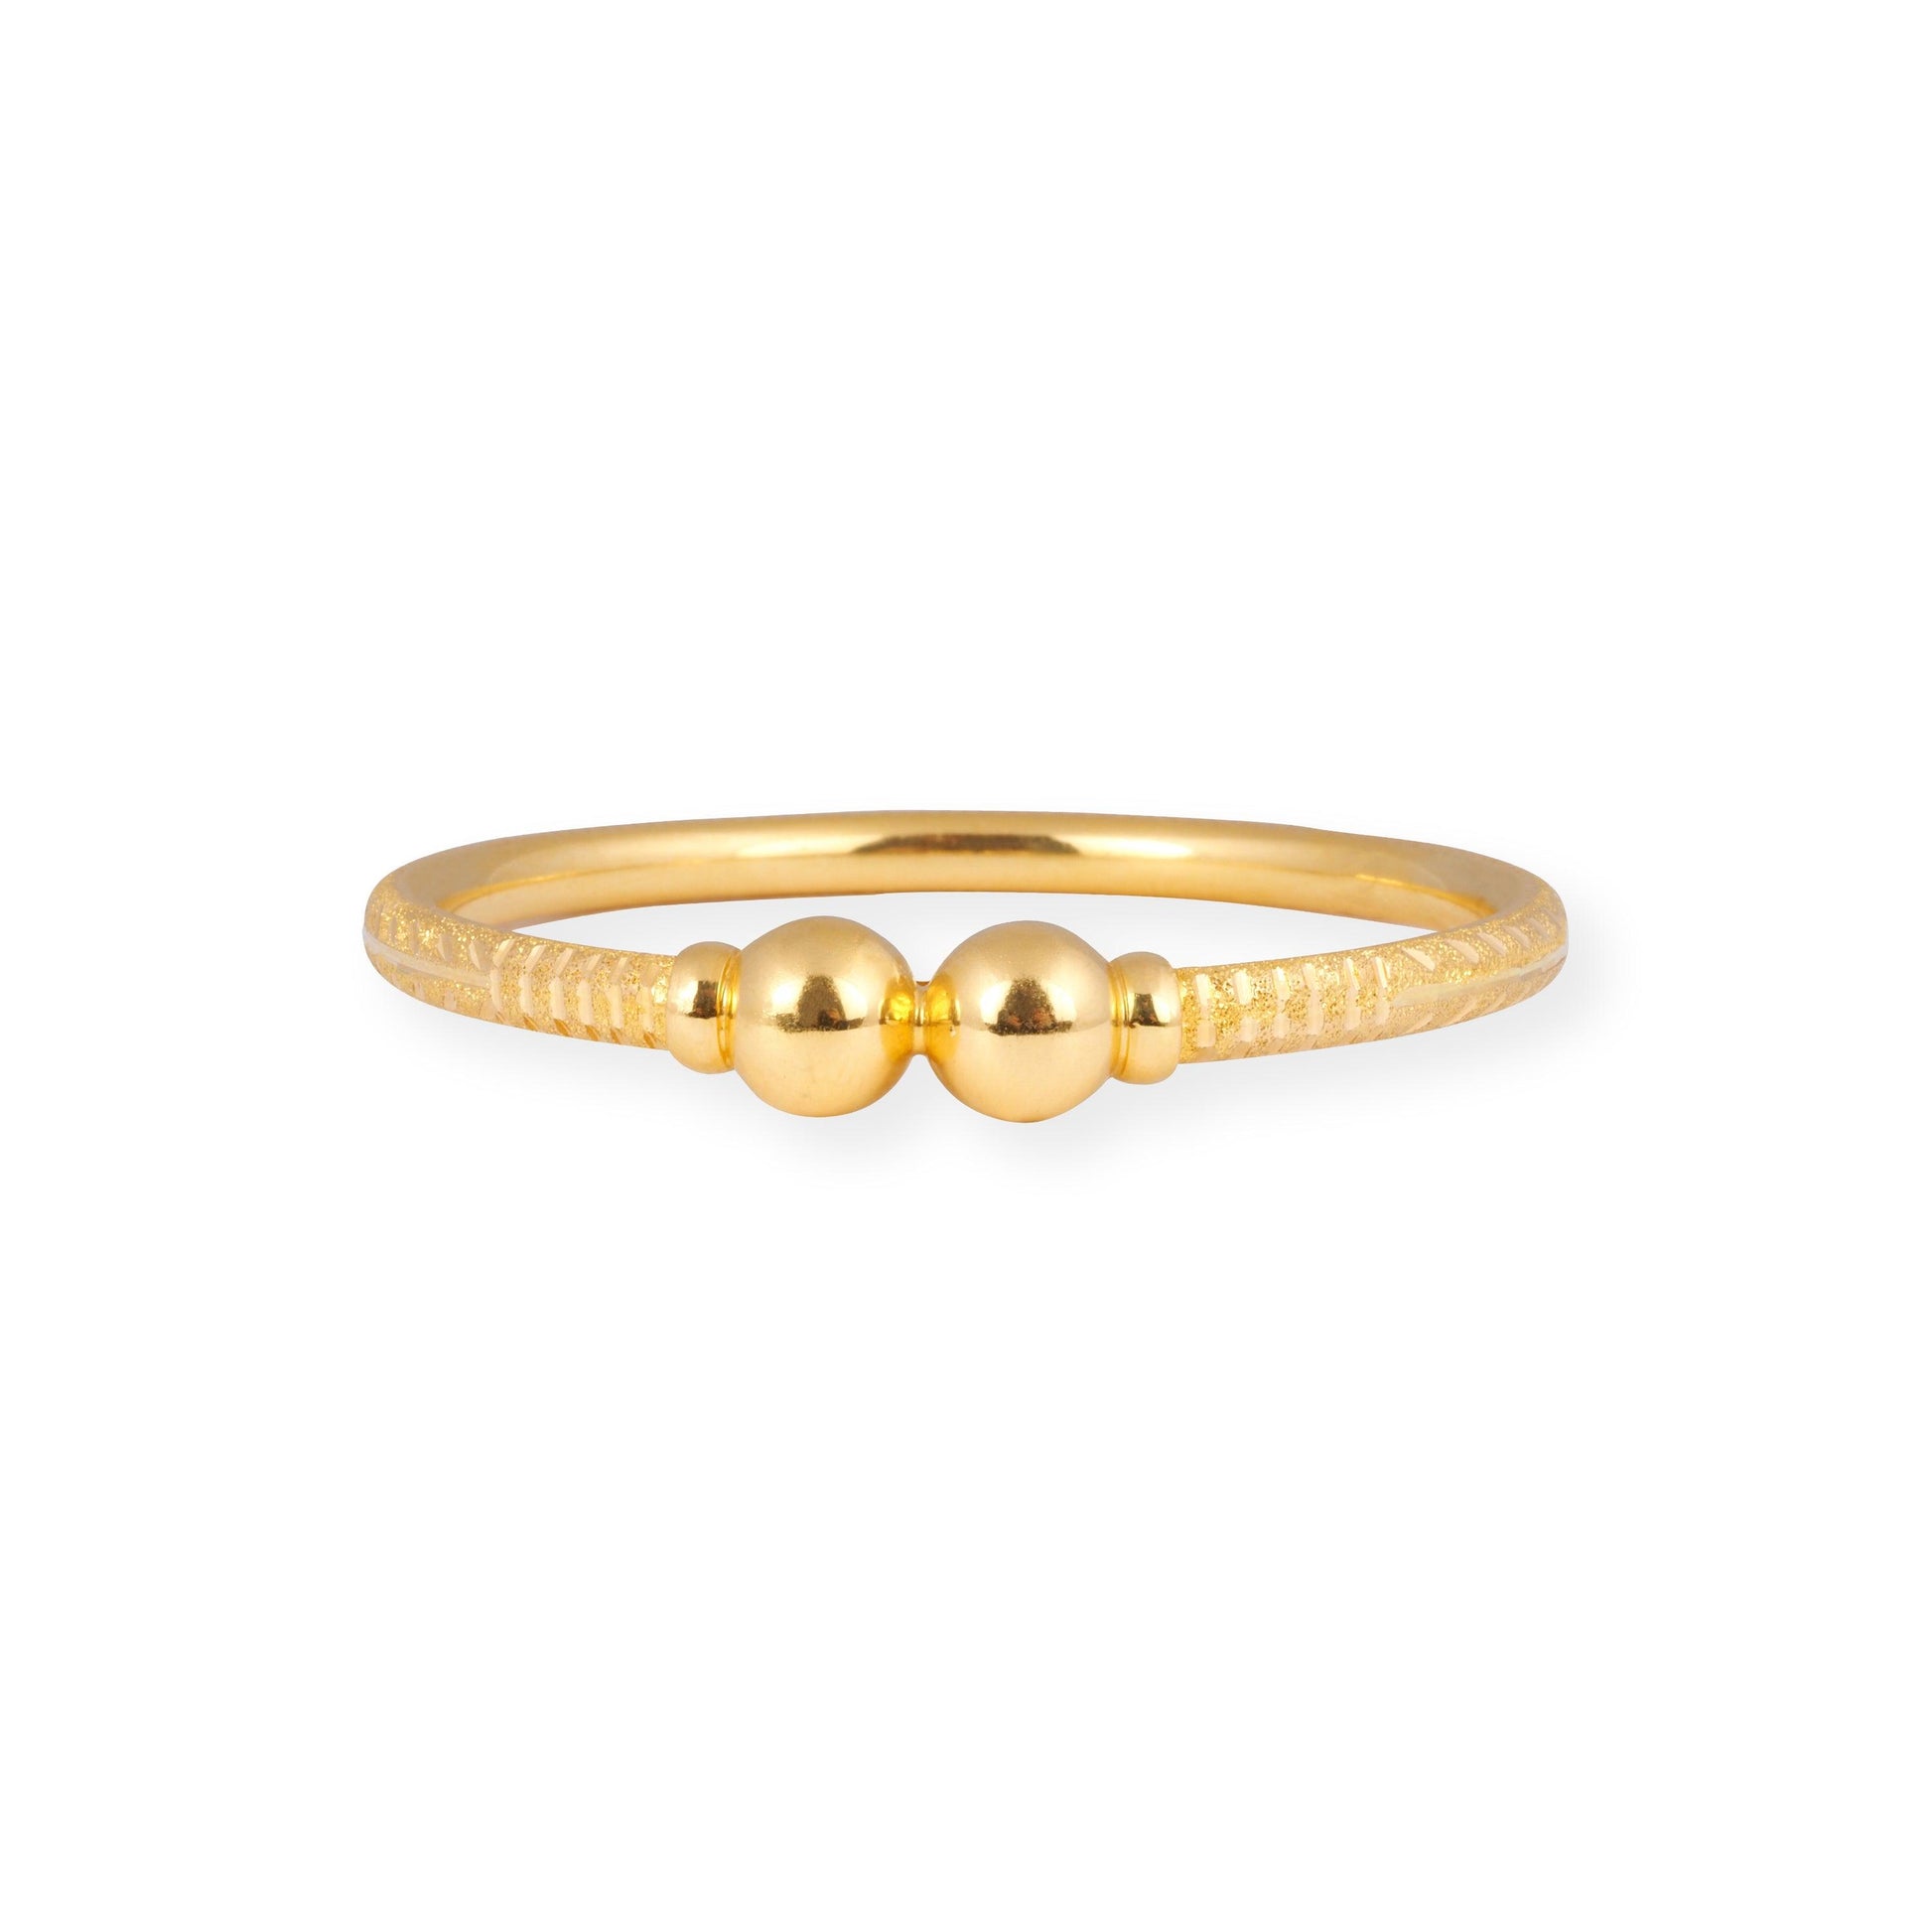 22ct Gold Hollow Tube Bangle with Hinge Fitting B-8599 - Minar Jewellers